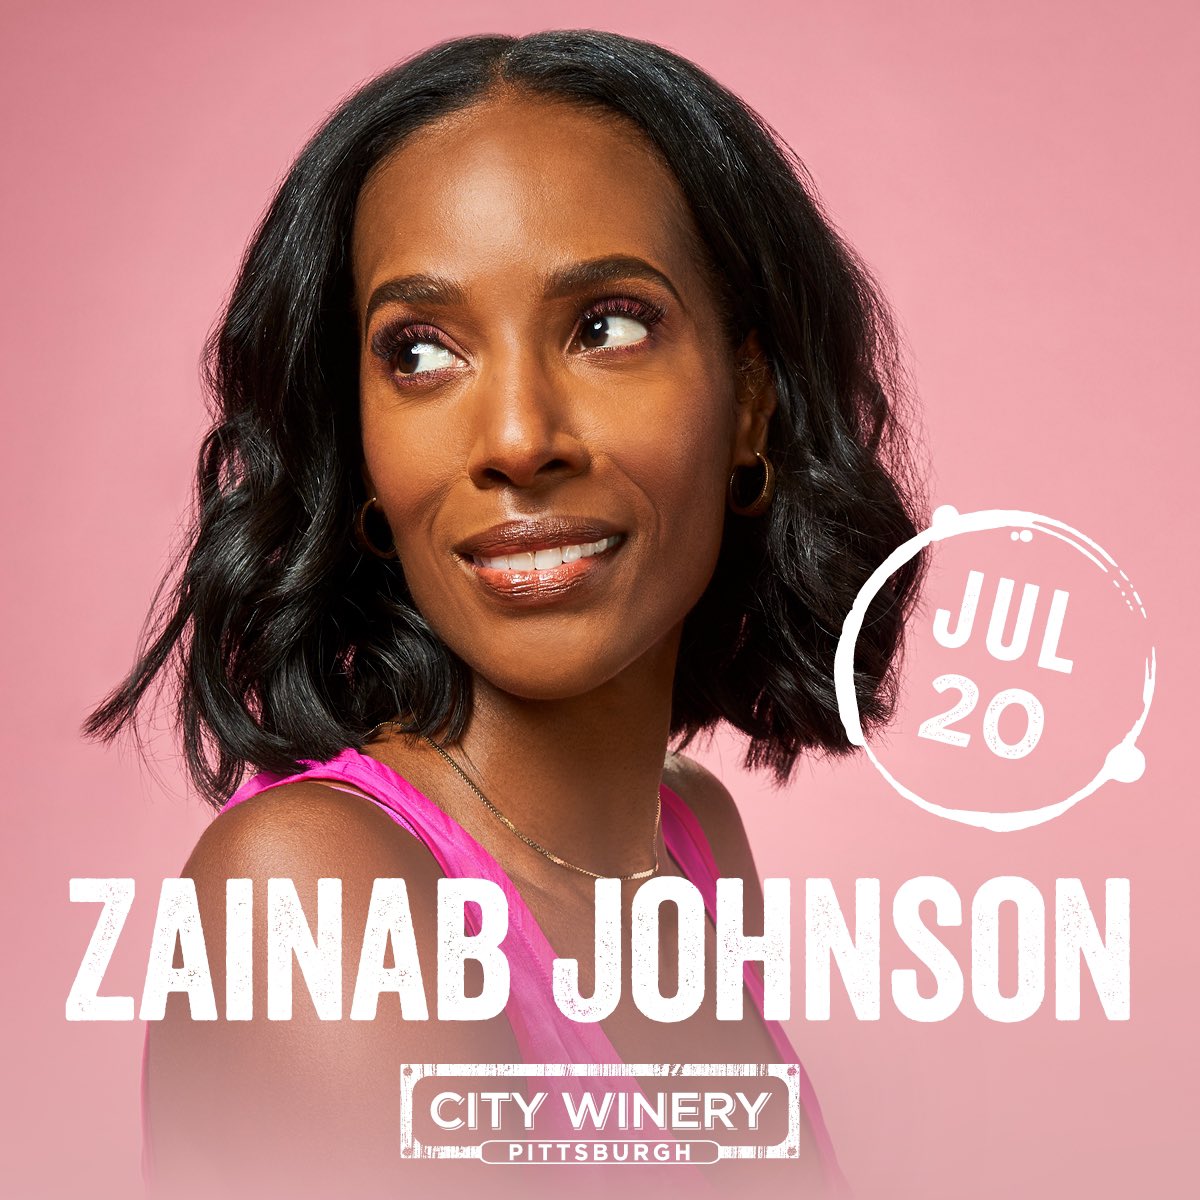 Zainab Johnson is an amazing comedian who's got a new special on Amazo